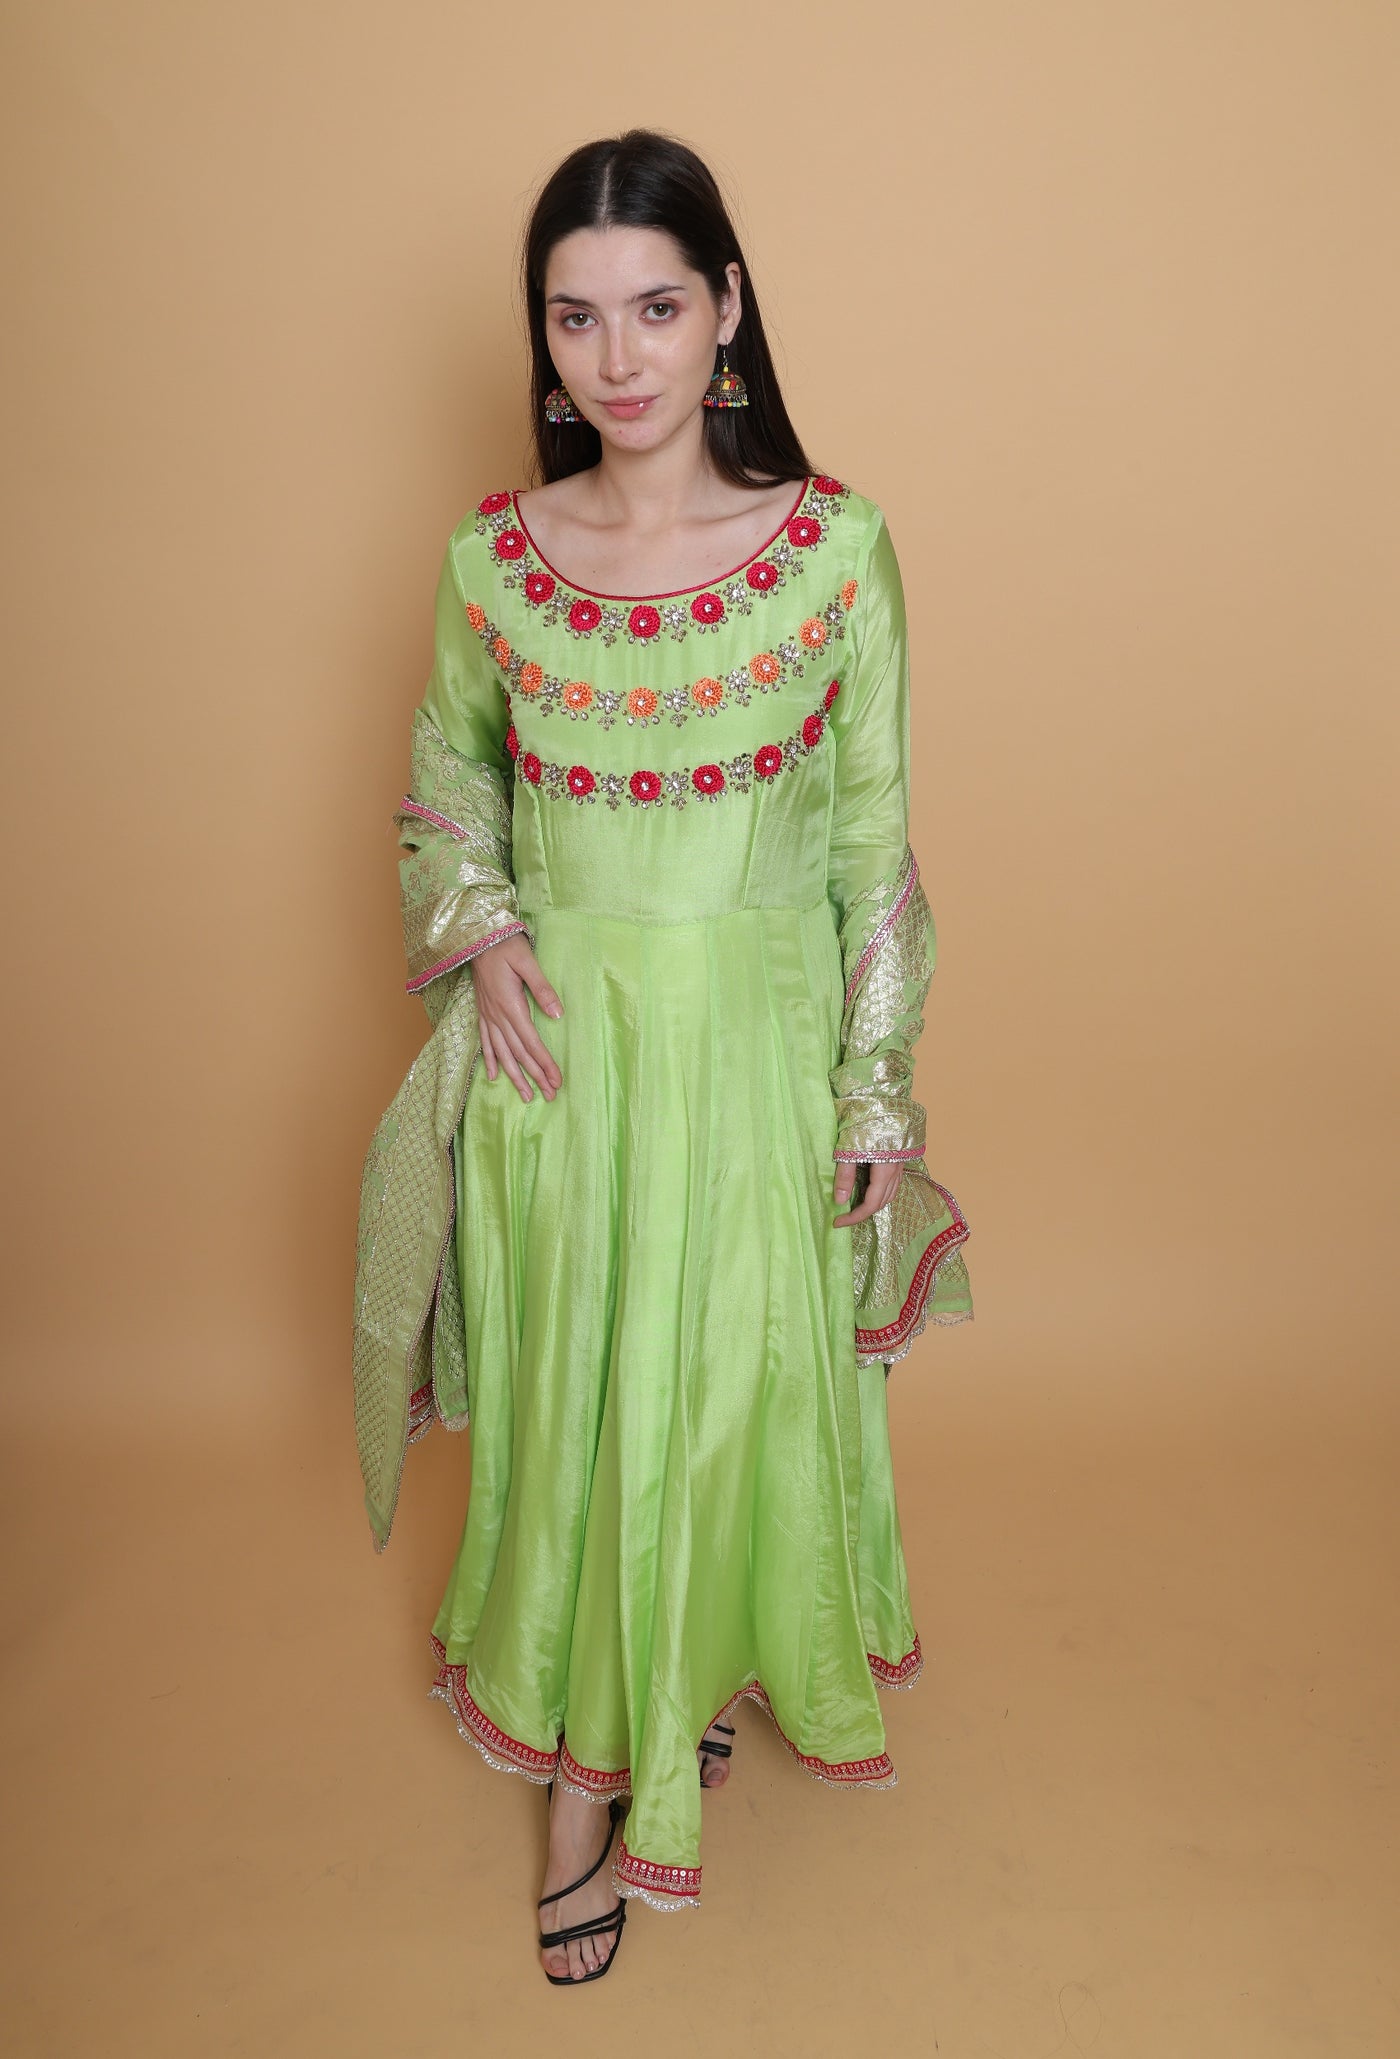 Destiny By Anjali Paradise Bloom Parrot Green Anarkali Suit - Hand-Embroidered Crochet Flower Details, Pure Crepe Fabric